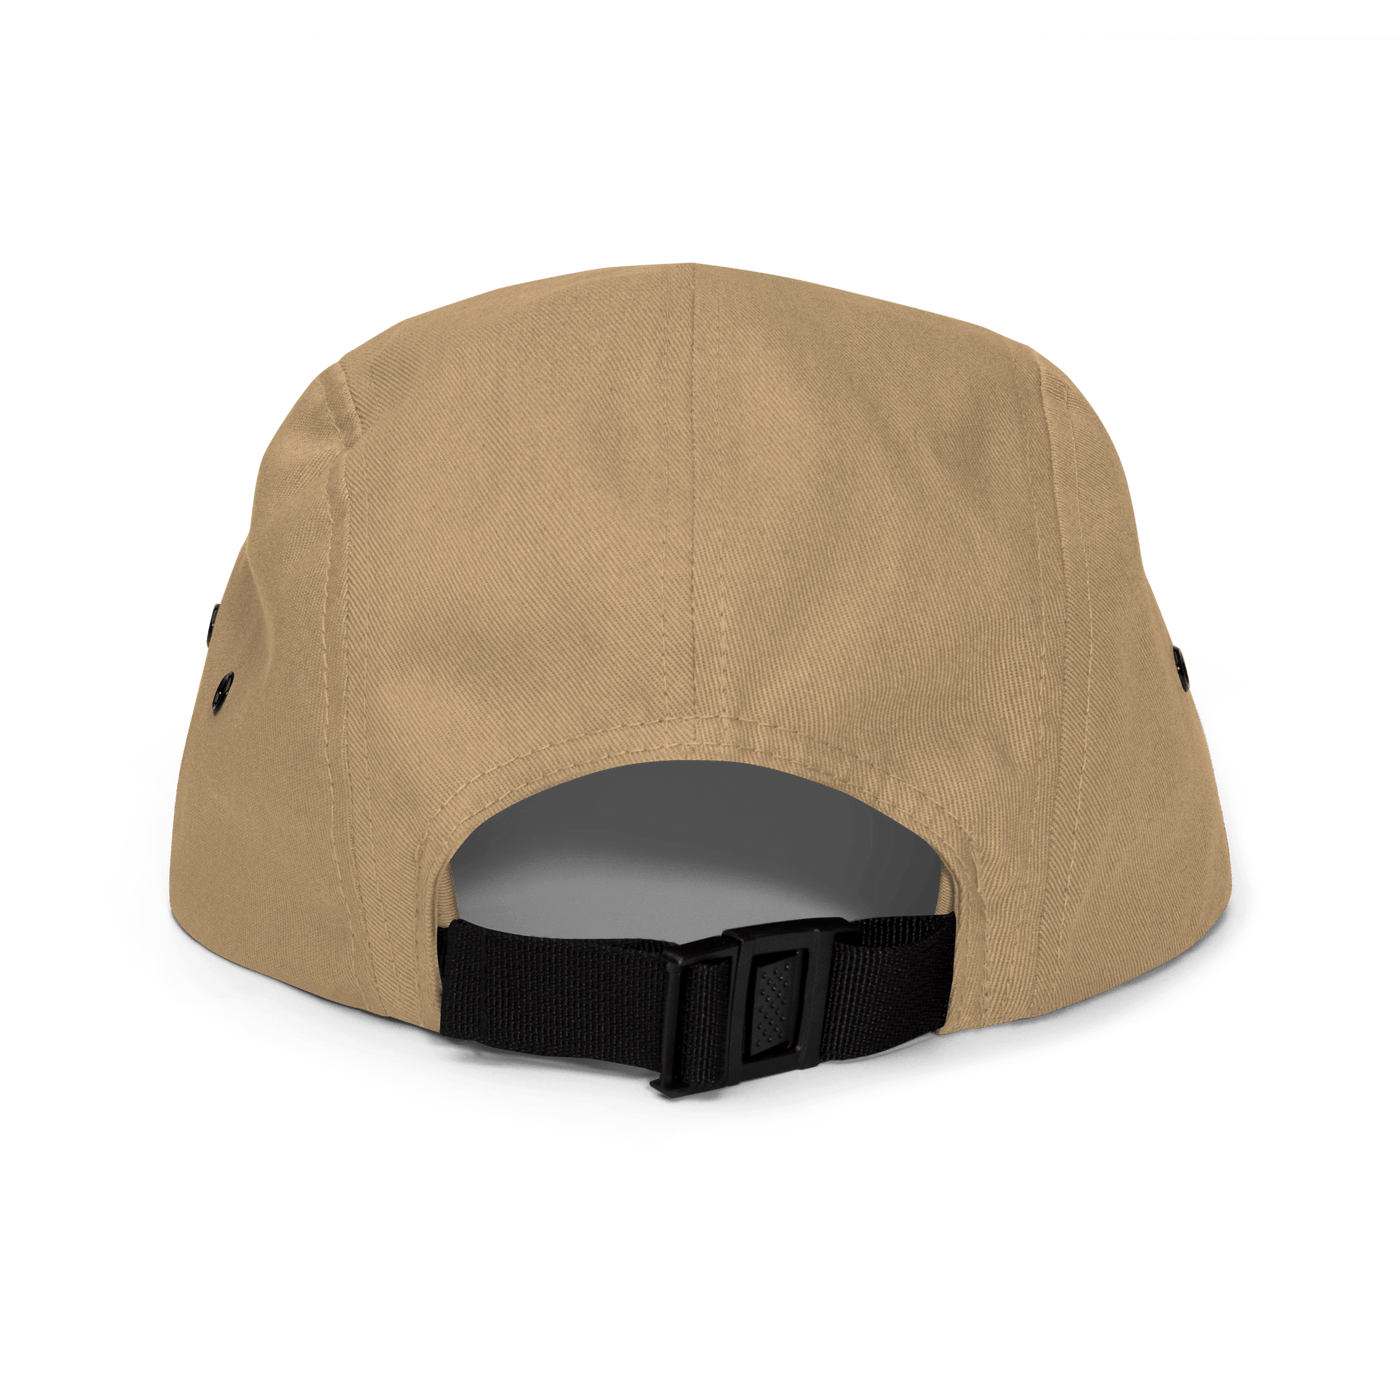 The key to my heart is Pasta Five Panel Cap - Khaki - - Just Another Cap Store